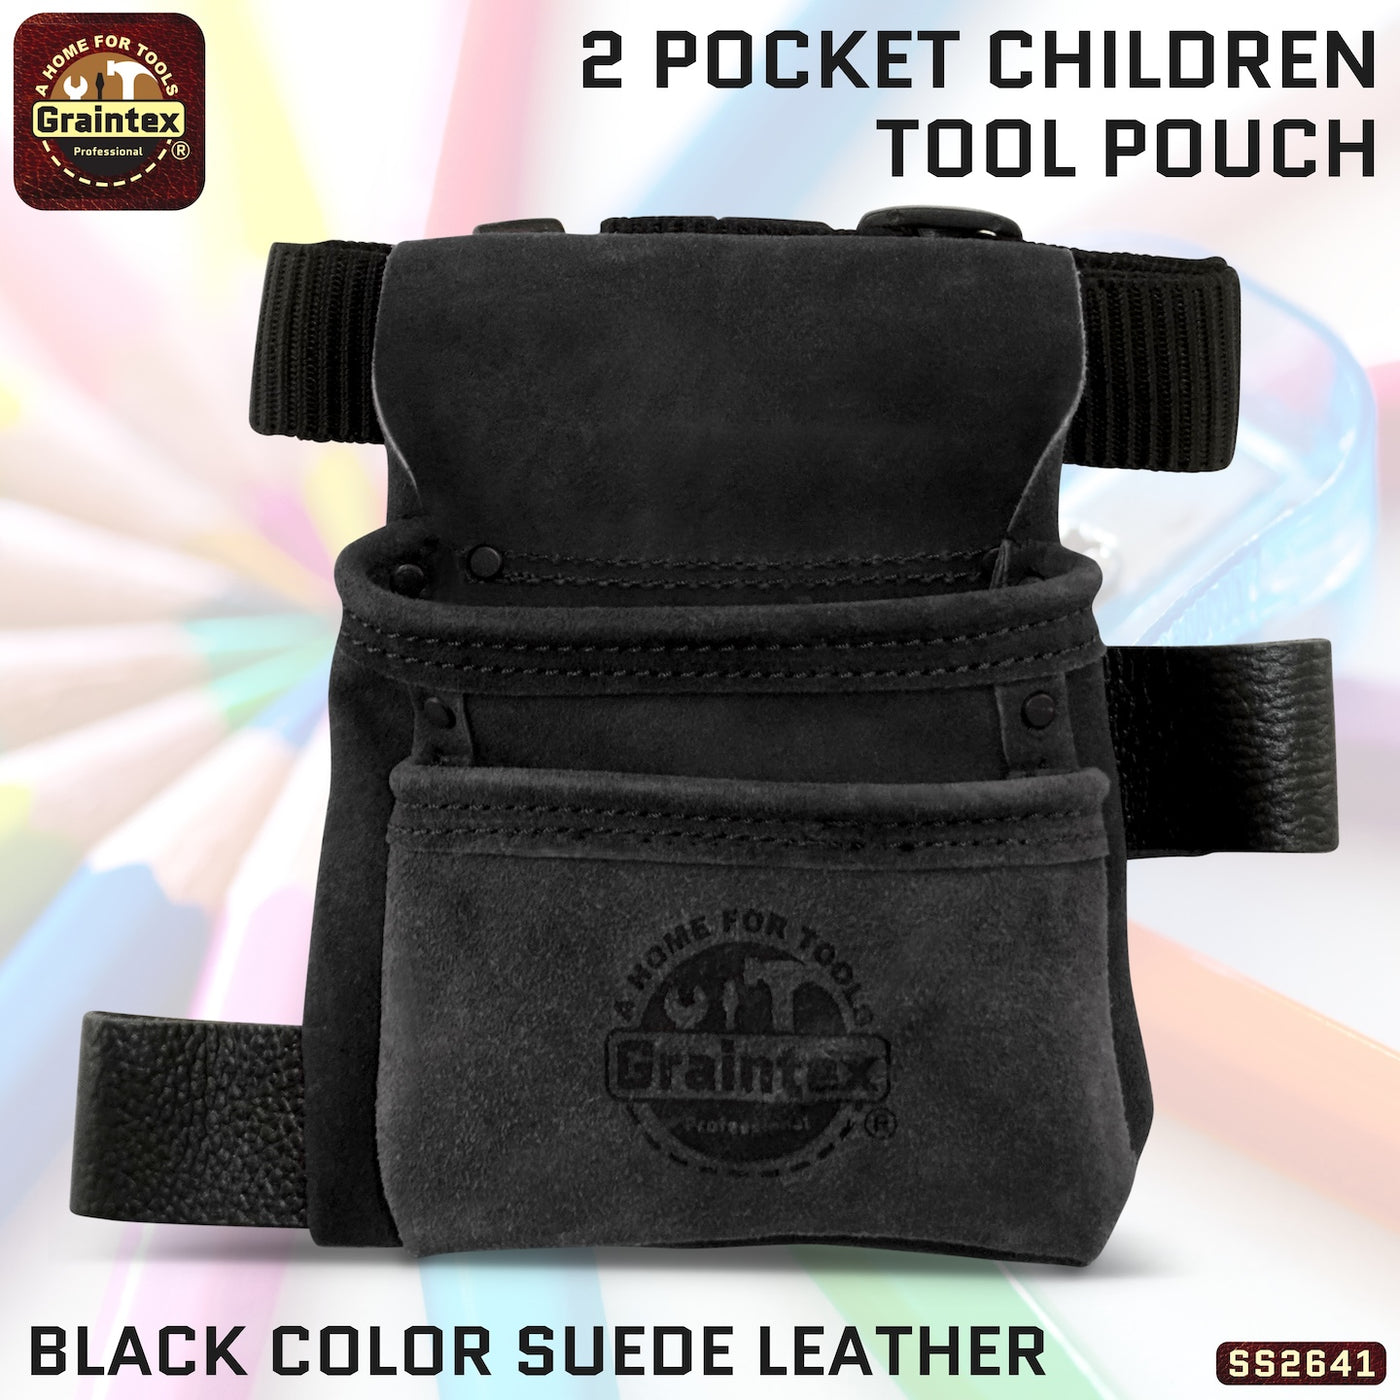 SS2641:: 2 Pocket Children Tool Pouch Black Color Suede Leather